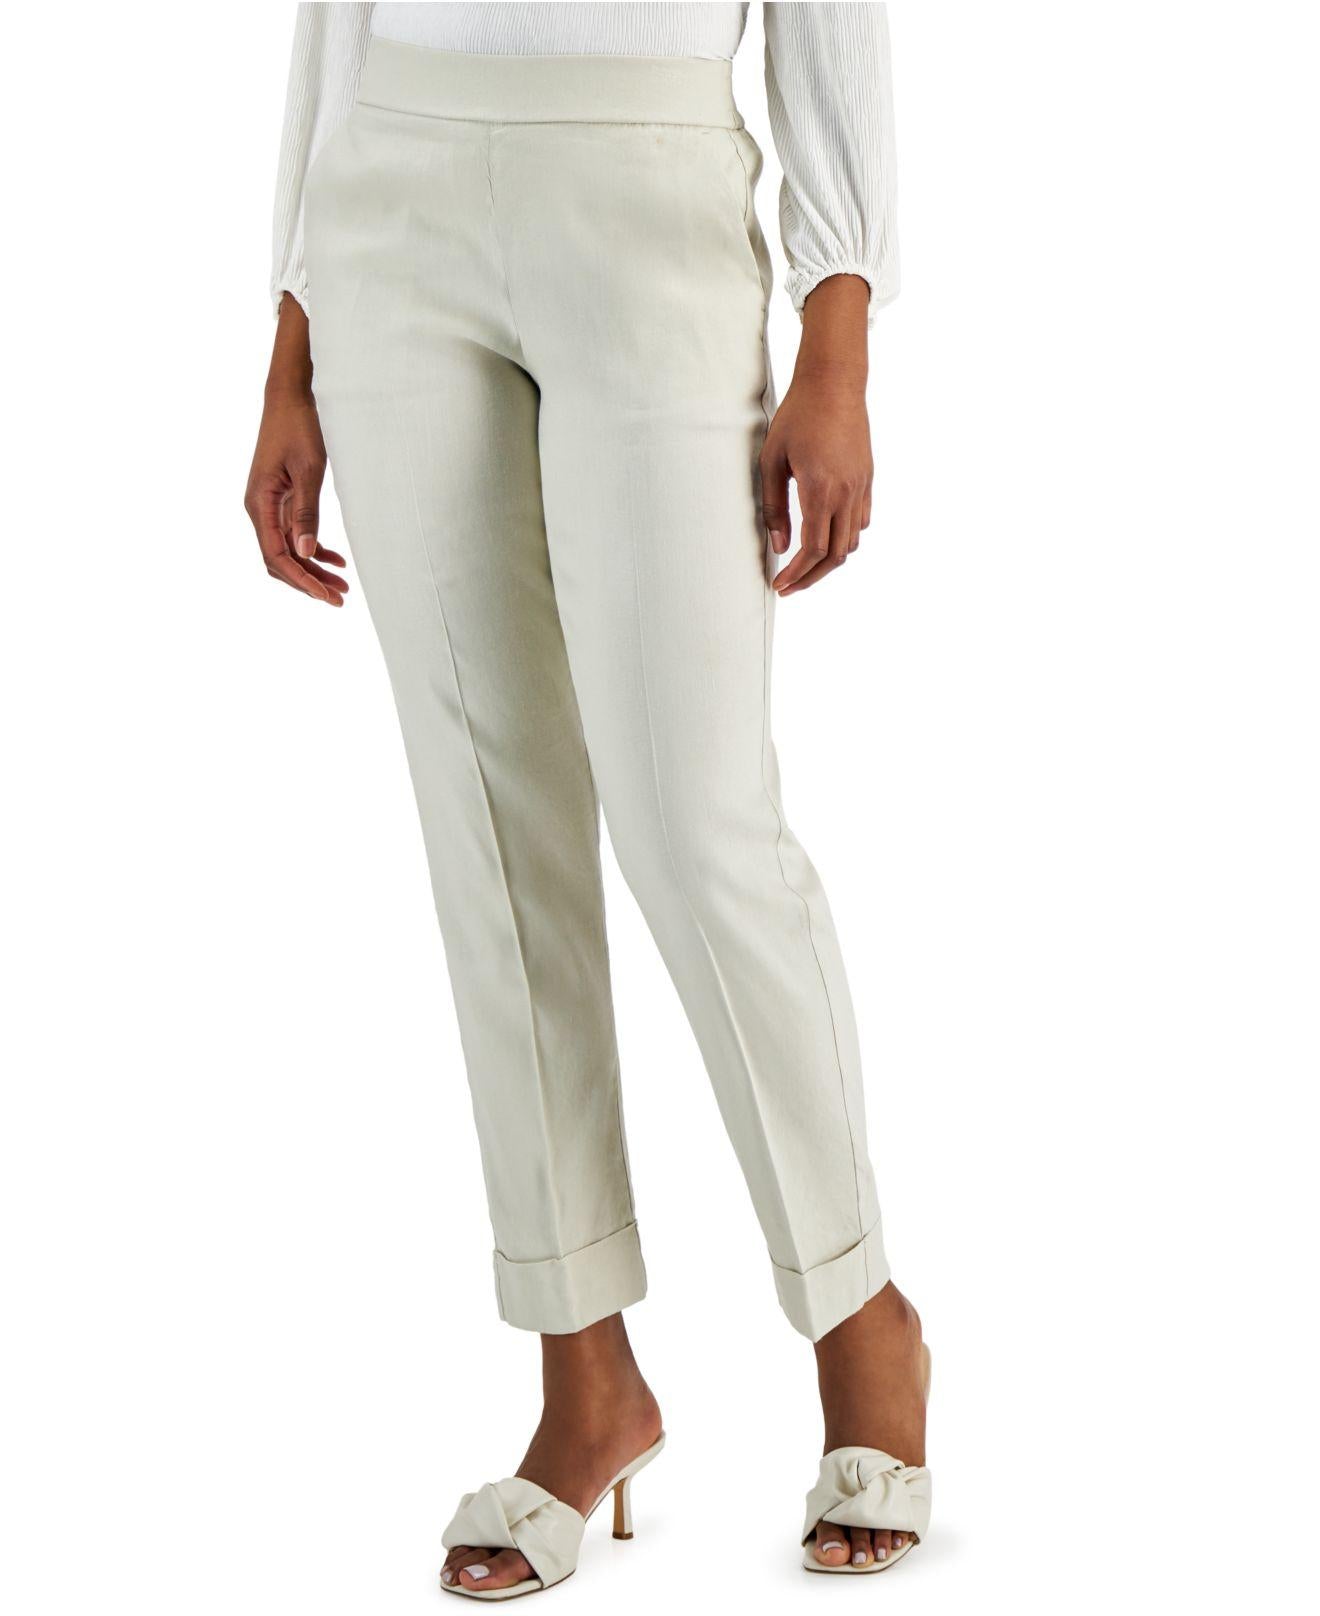 ALFANI Womens White Stretch Zippered Pocketed Seamed Wear To Work Straight leg Pants 4